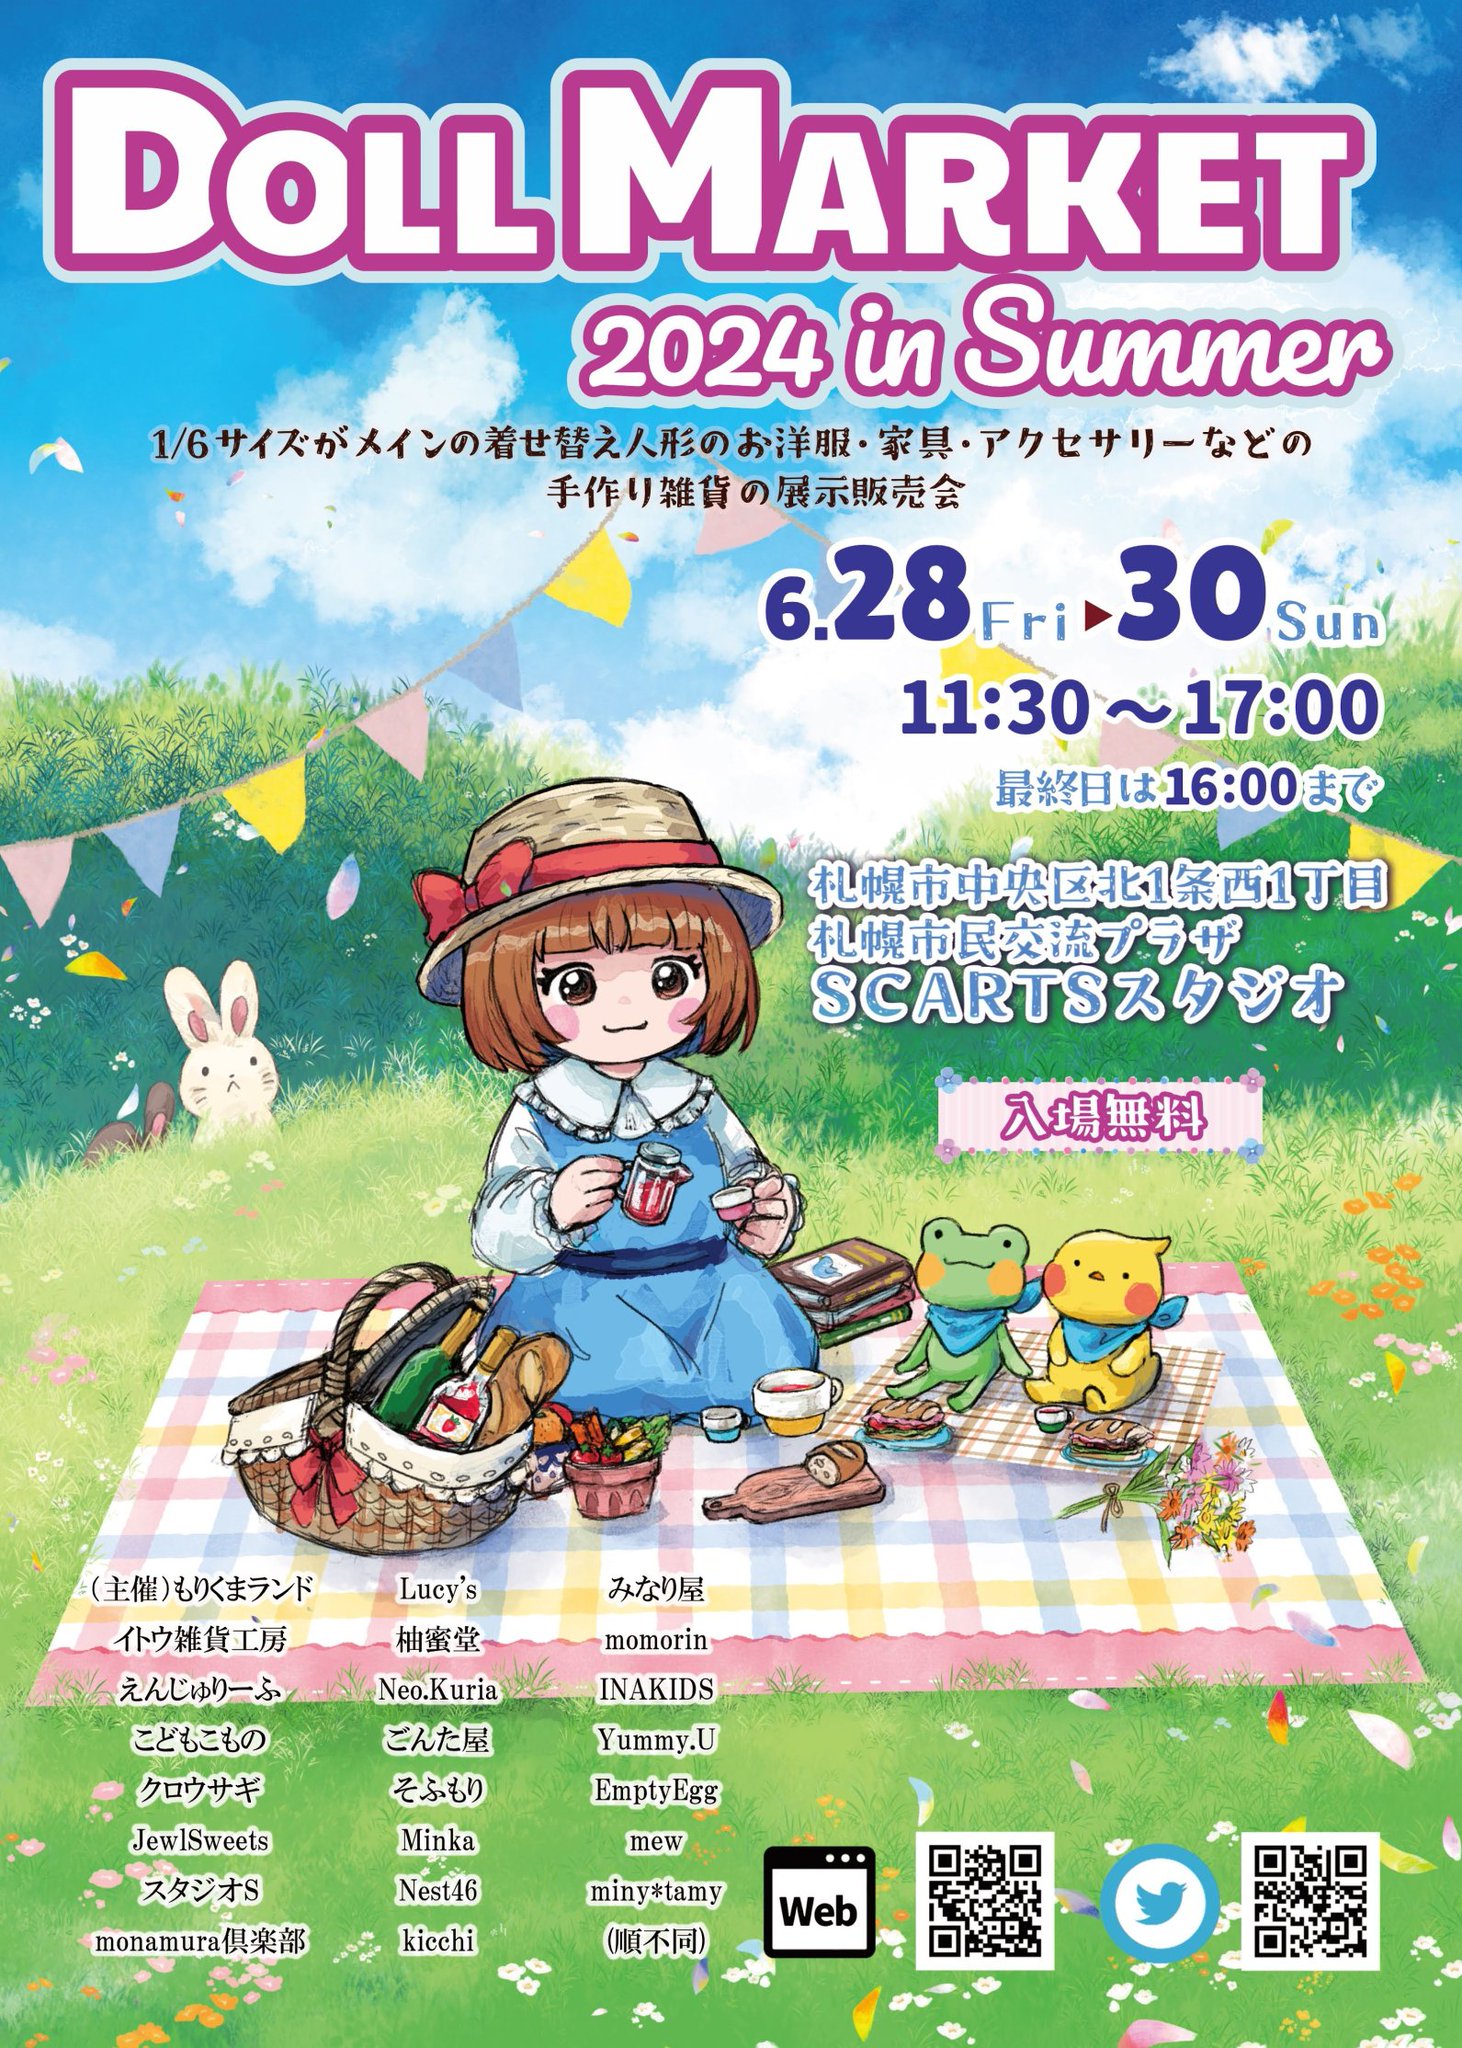 Doll Market 2024 in Summerサムネイル画像